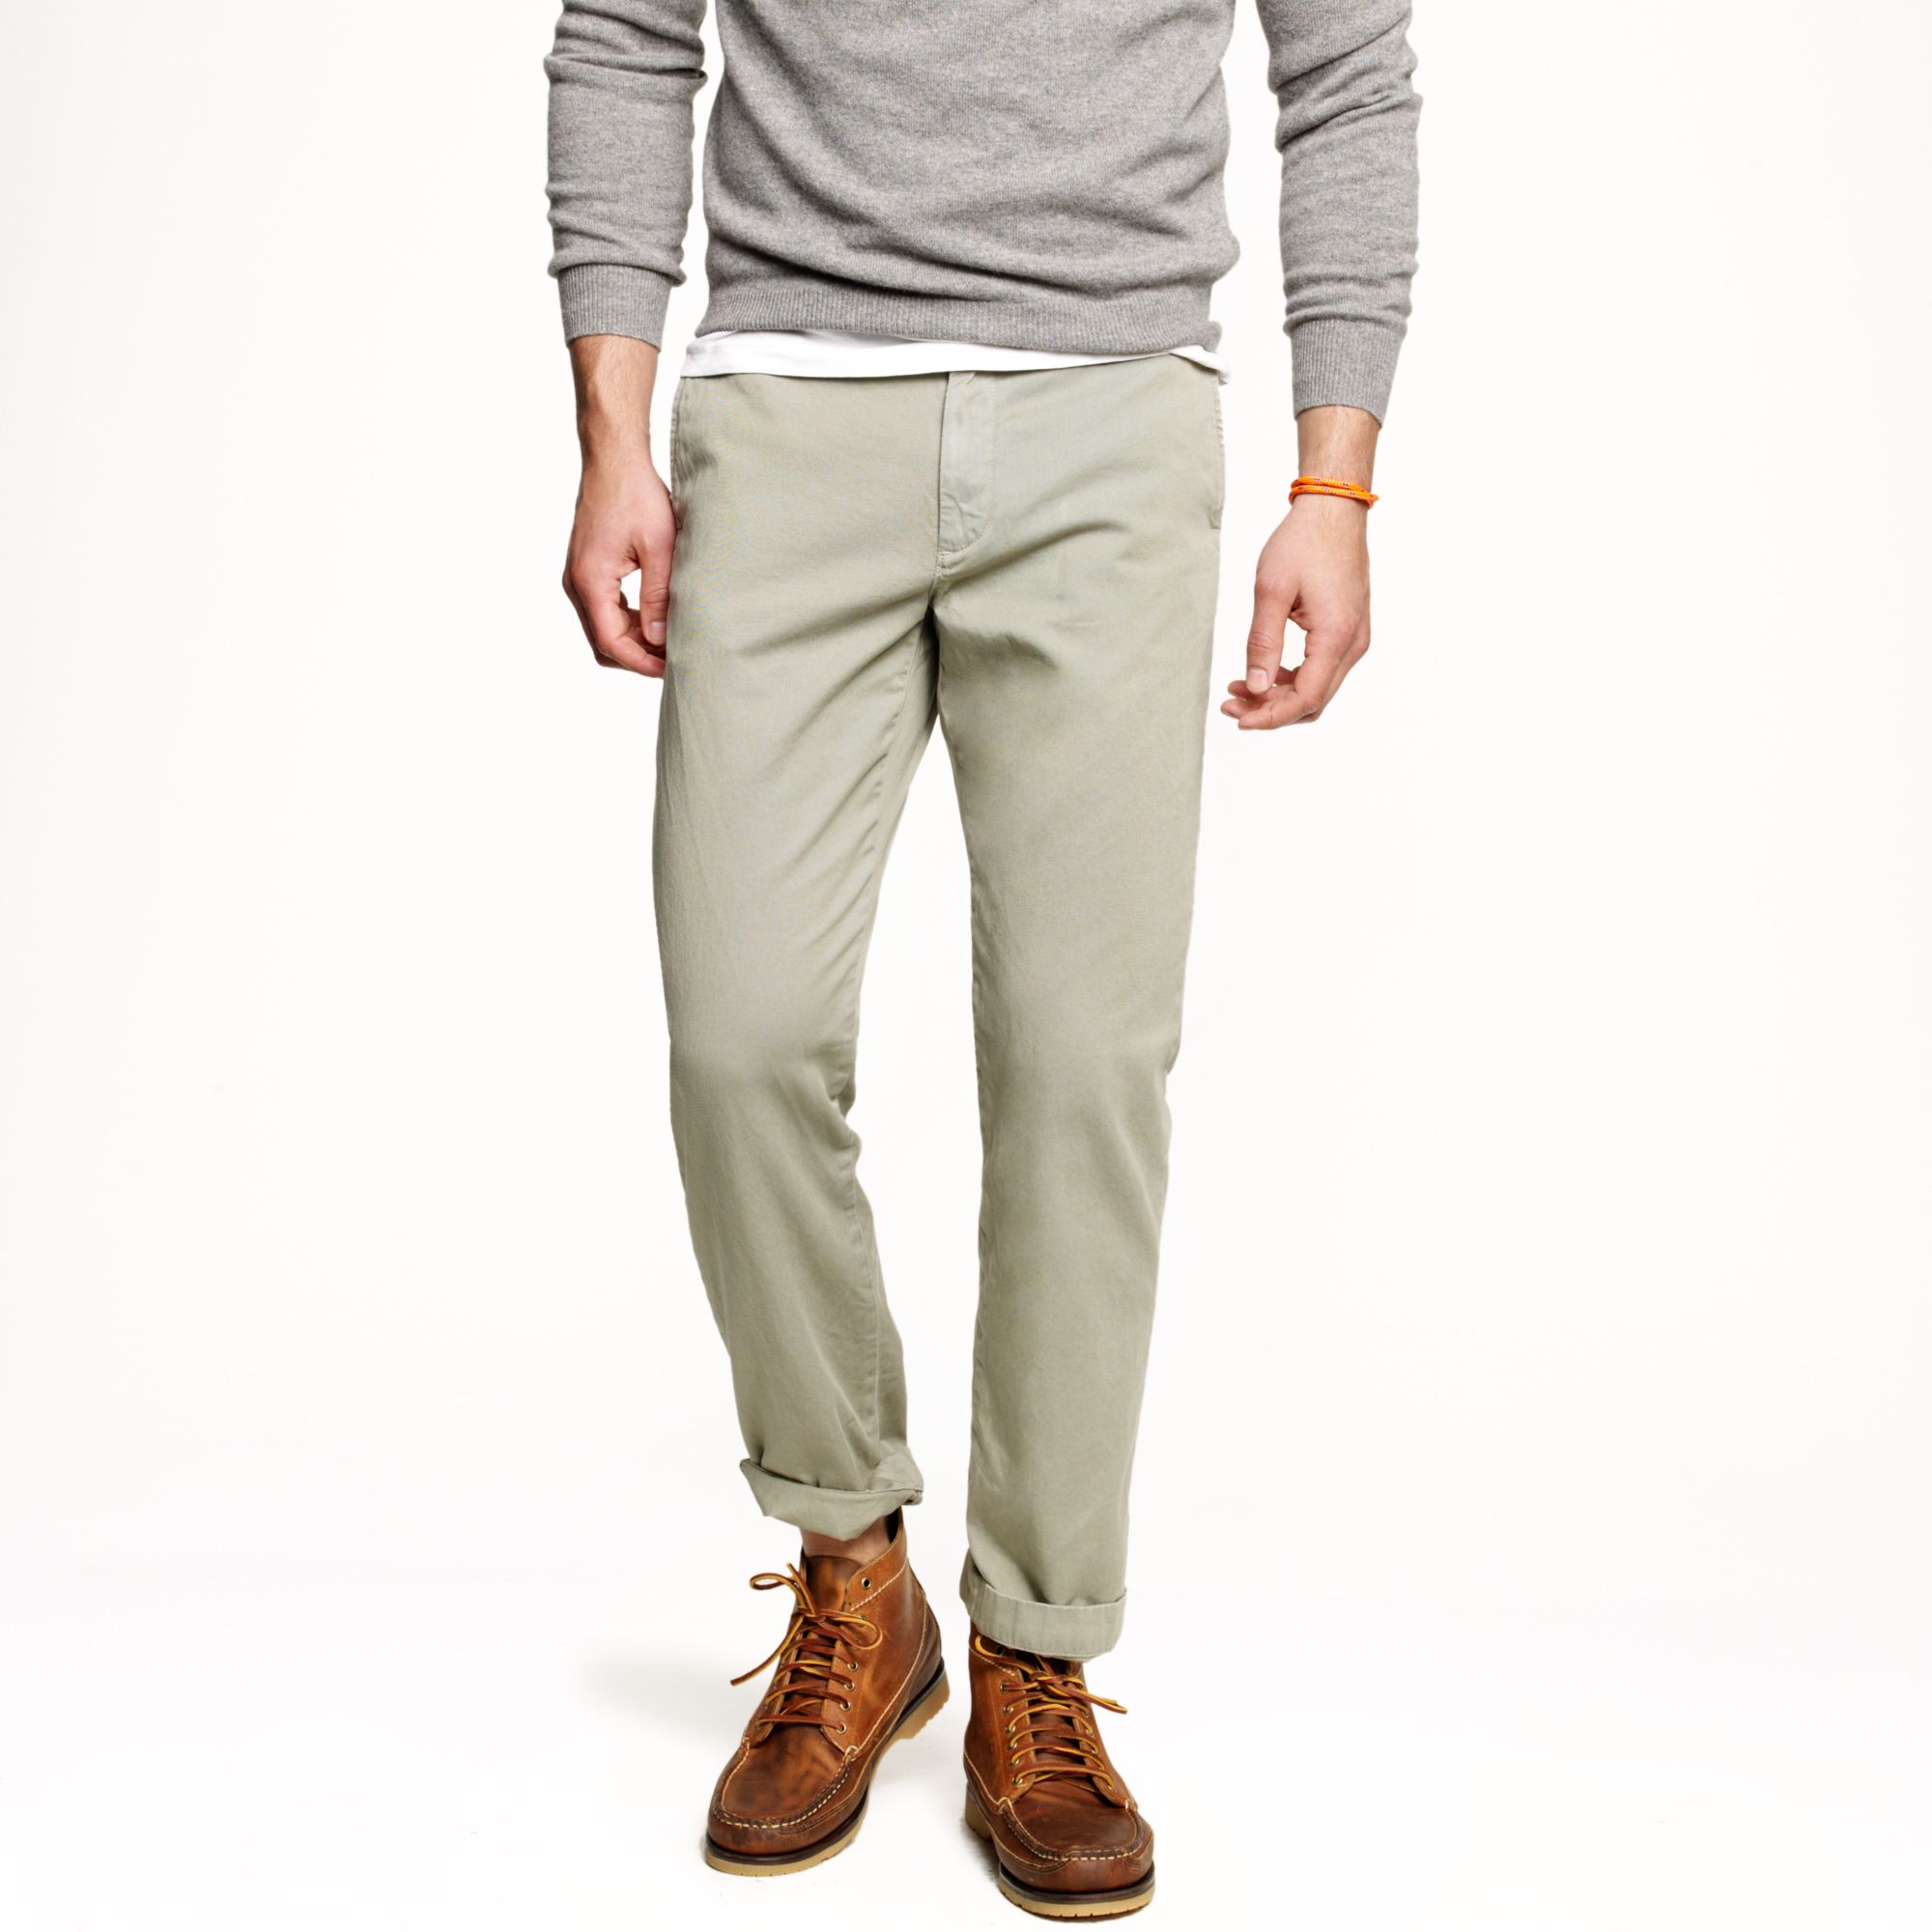 J.Crew Sun Faded Chino in Urban Slim Fit in Green for Men - Lyst